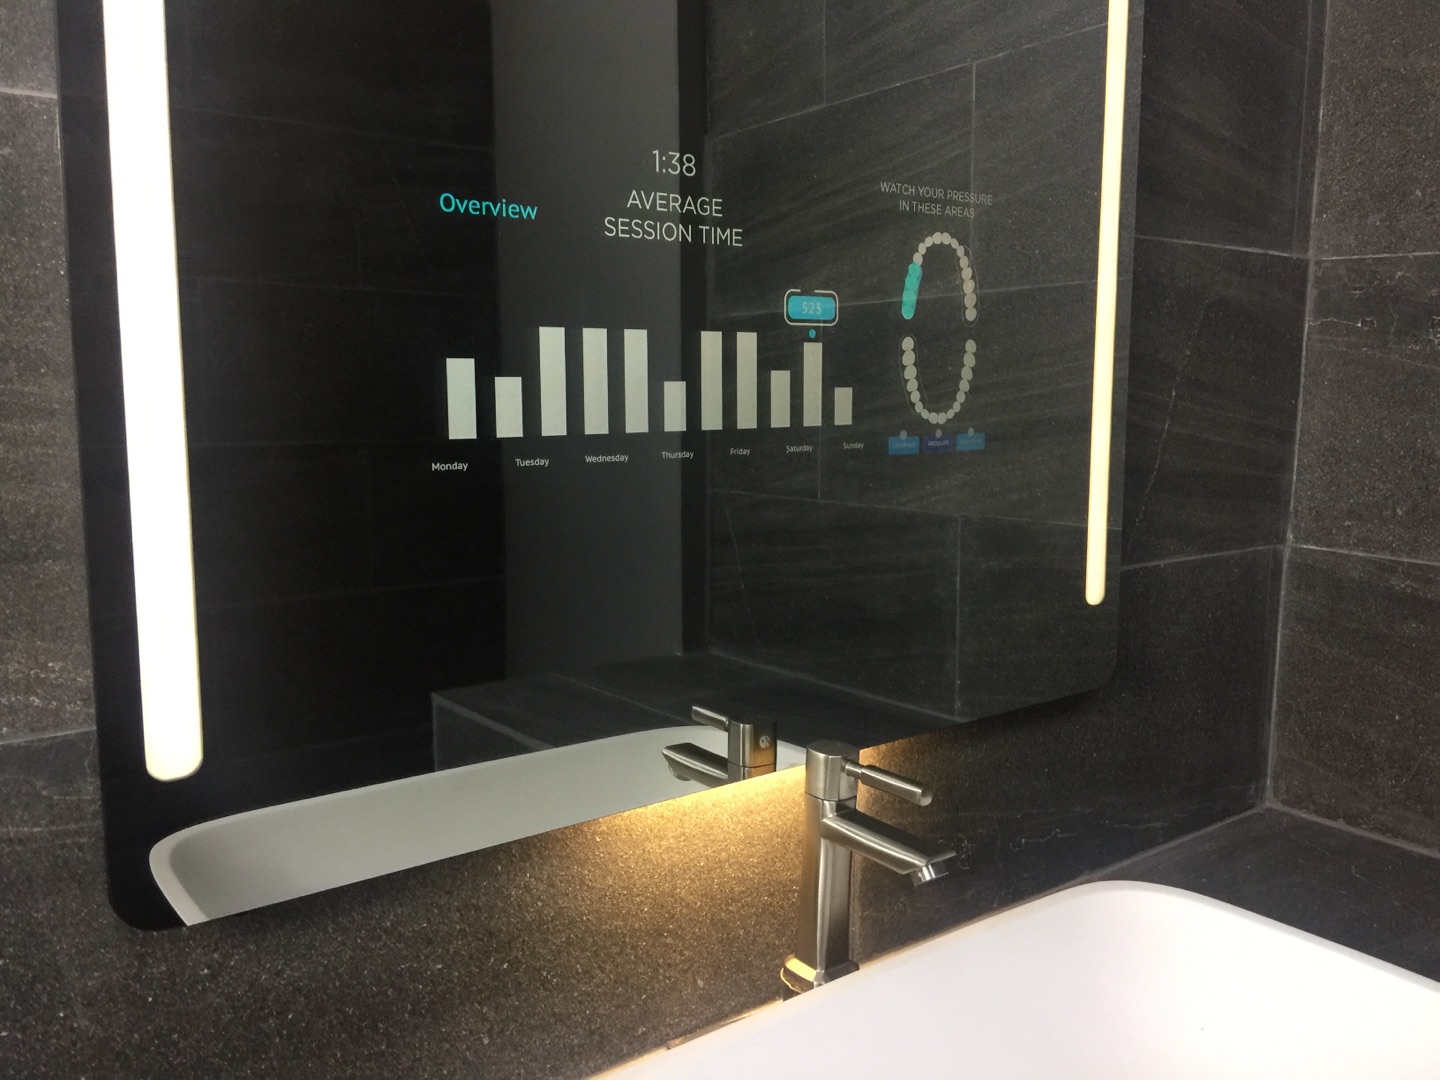 11 High-Tech Gizmos and Gadgets for the Bathroom